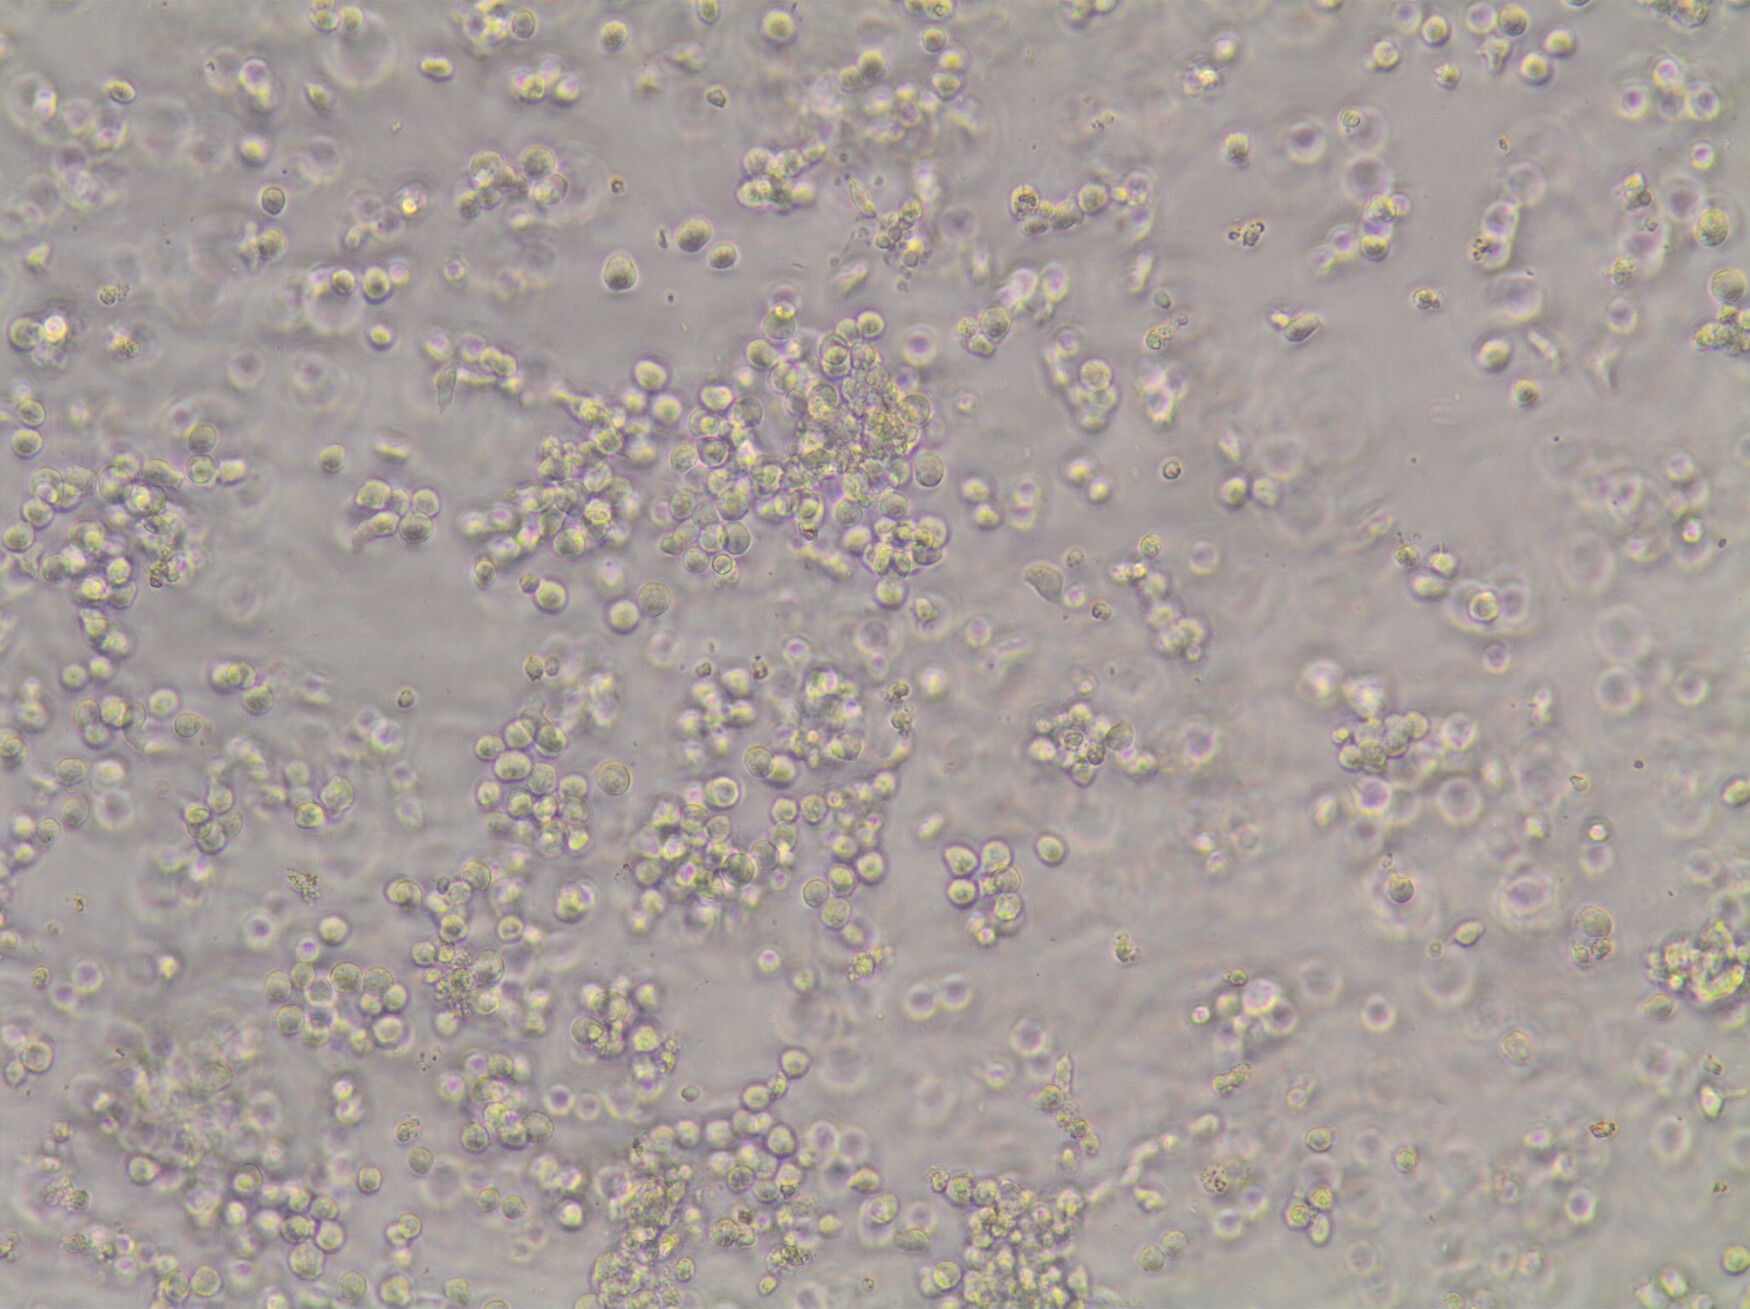 stem cells in a dish